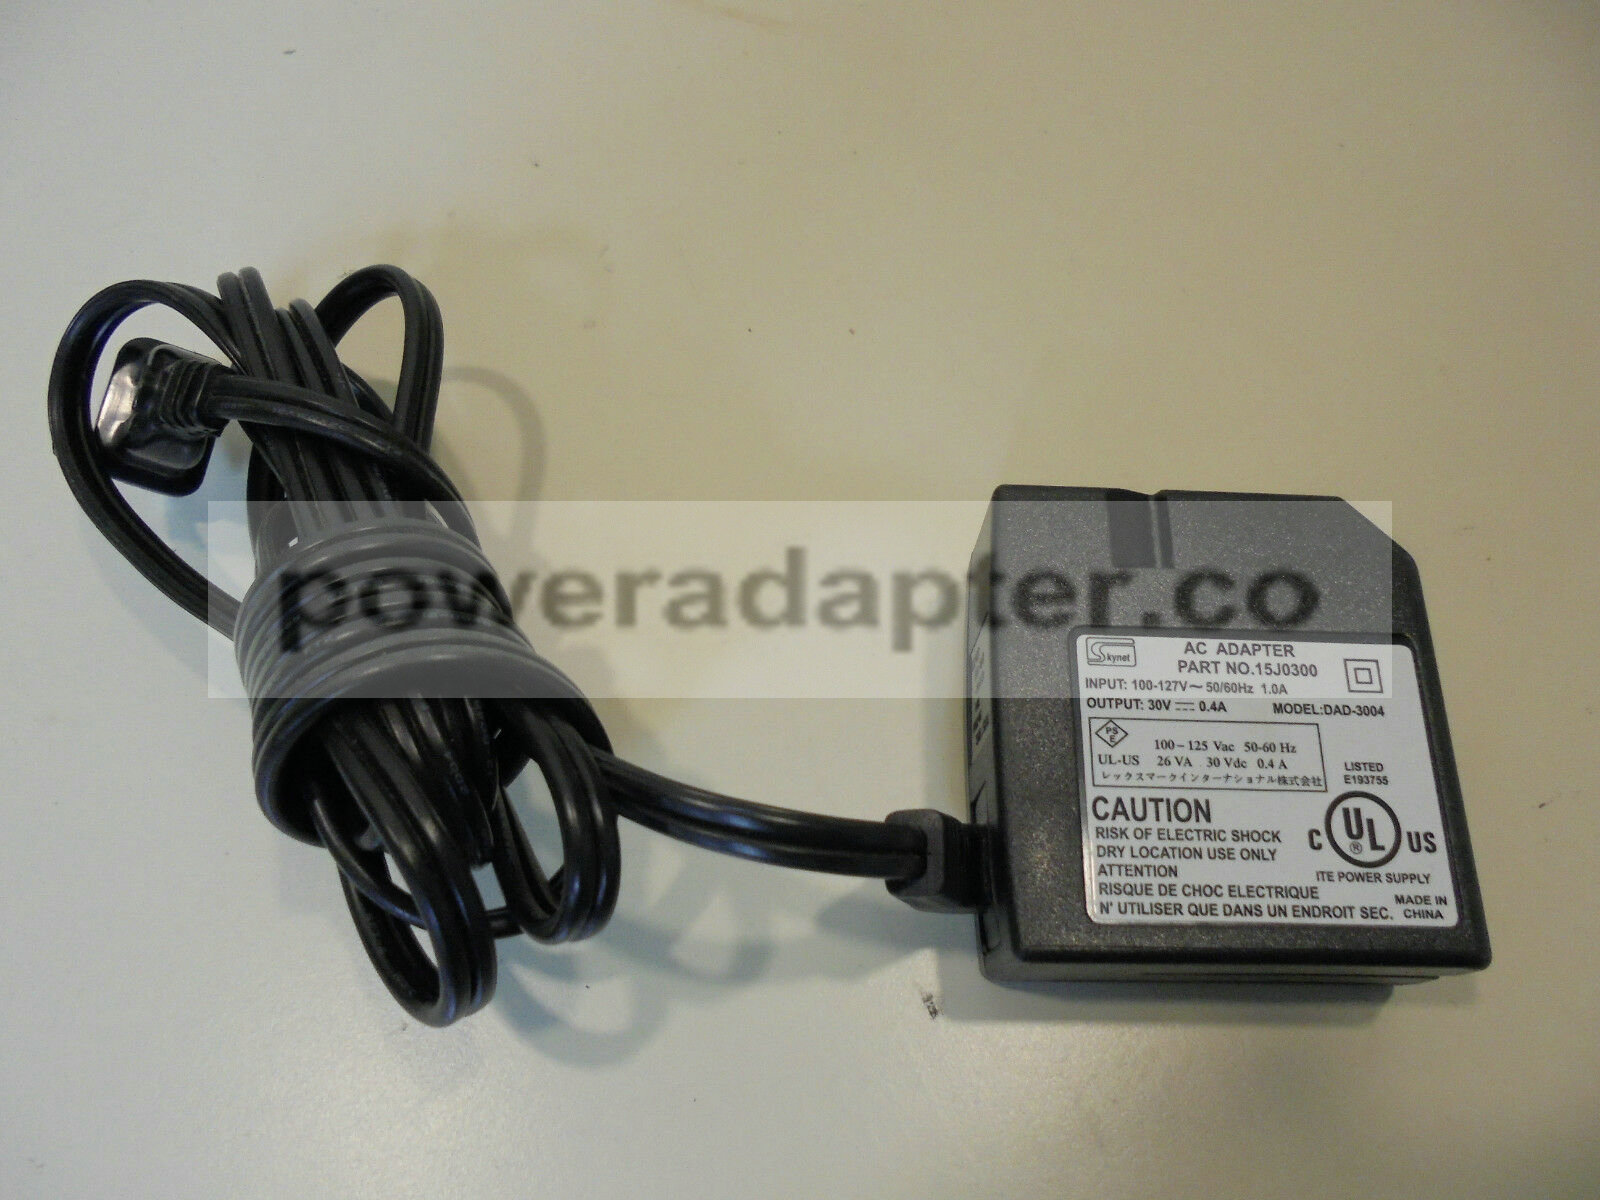 Skynet 15J0300 LEXMARK DELL - Printer AC Power Supply Adapter Cord - DAD-3004 Condition: new MFG: Skynet Compatible